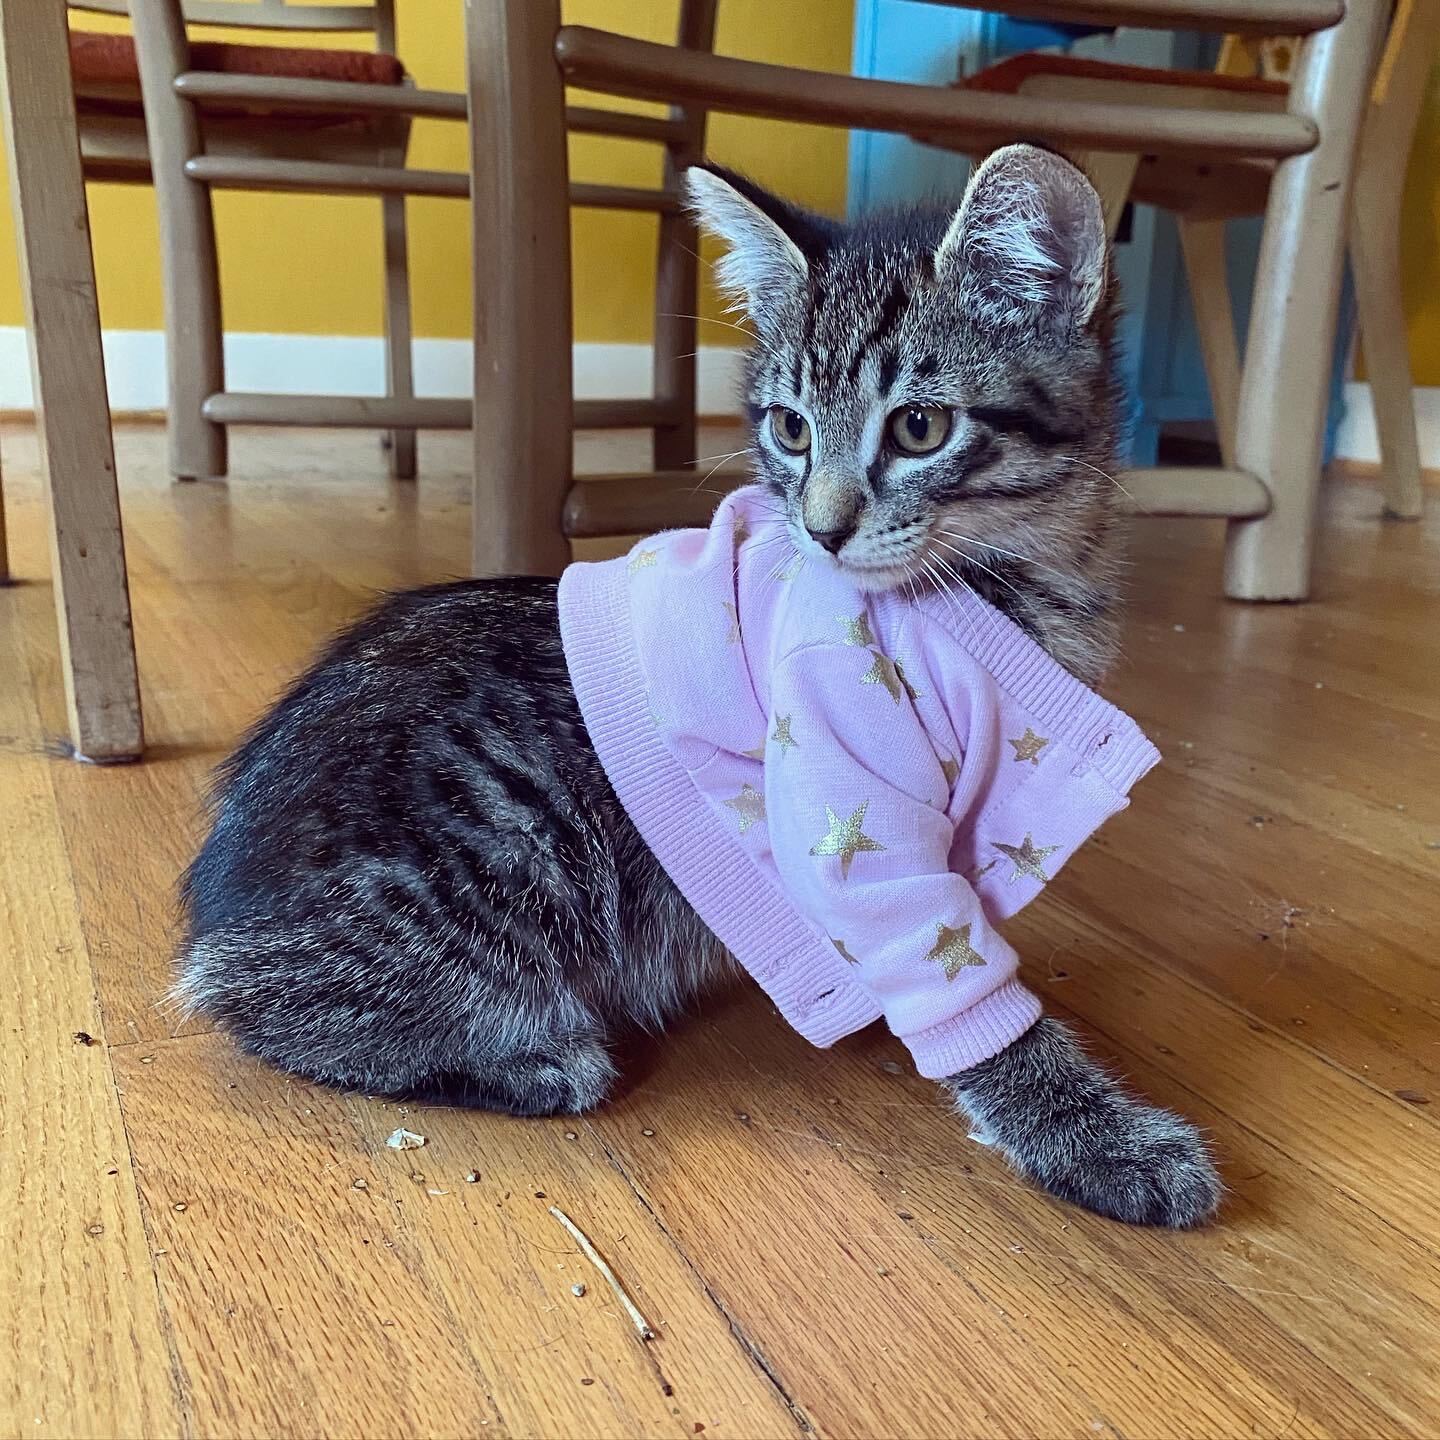 kitten with grey striped fur wearing a lavender sweater with gold stars.